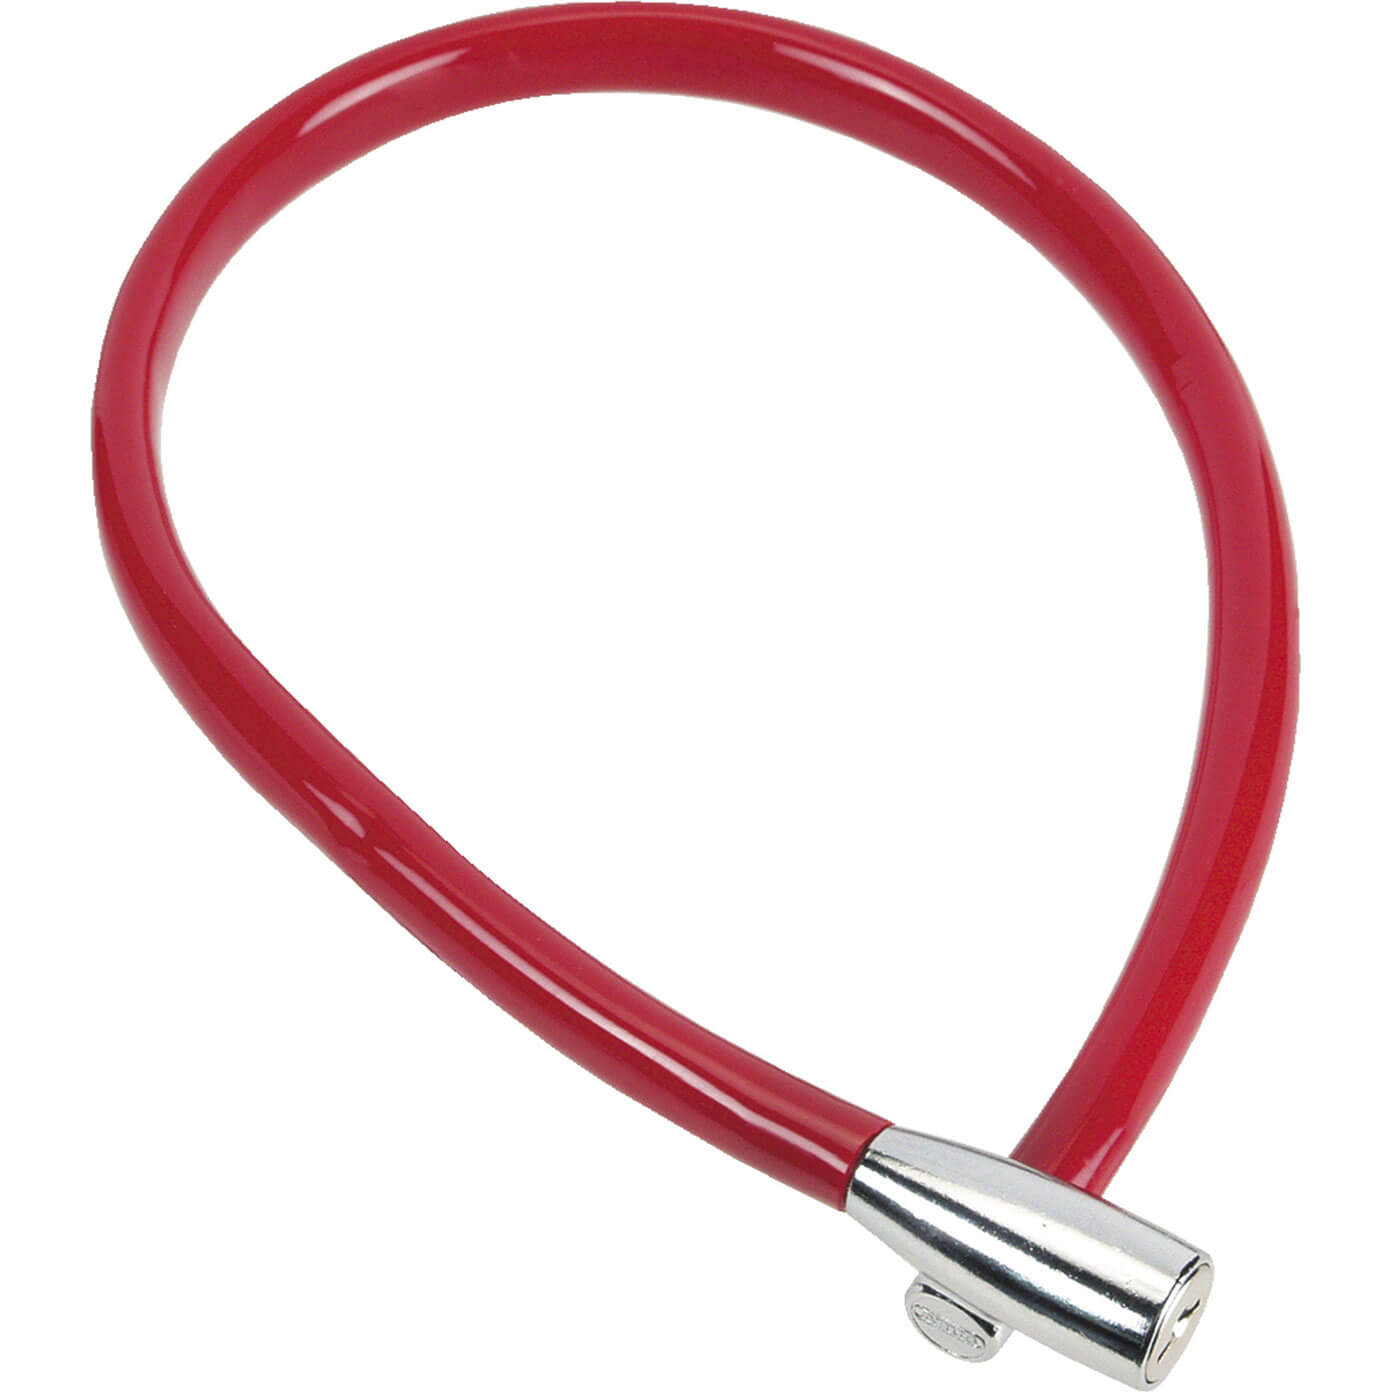 Image of Abus 1900 Basic 650mm Bicycle Cable Lock 6mm Diameter